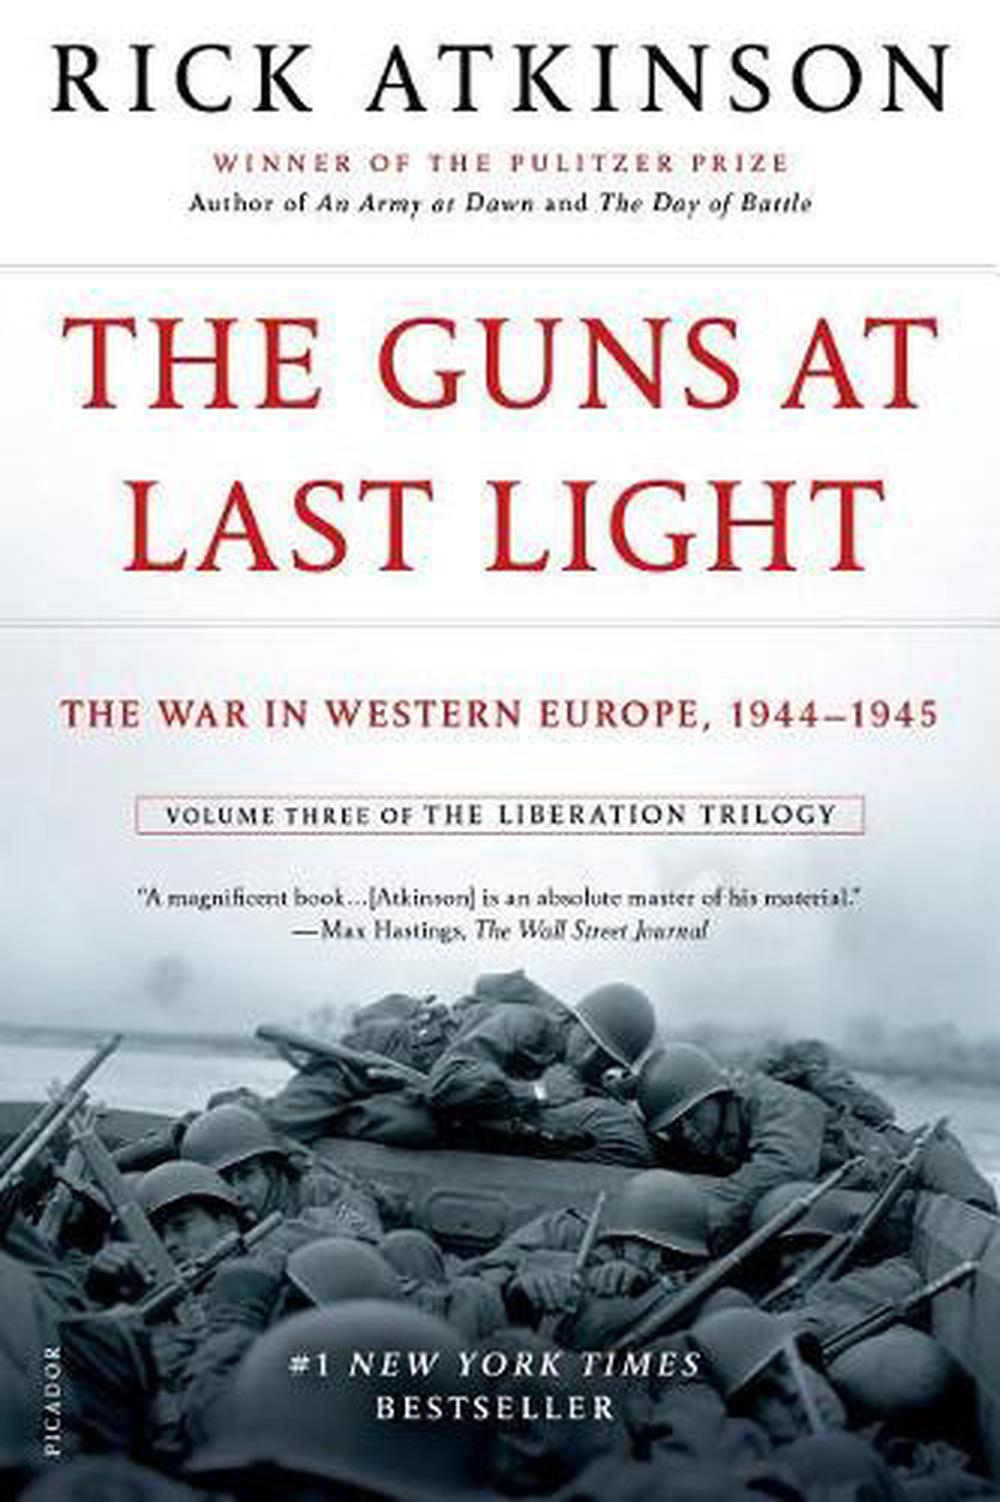 The Liberation Trilogy: The Guns at Last Light : The War in Western Europe, 1944-1945 (Series #3) (Paperback) - image 1 of 1